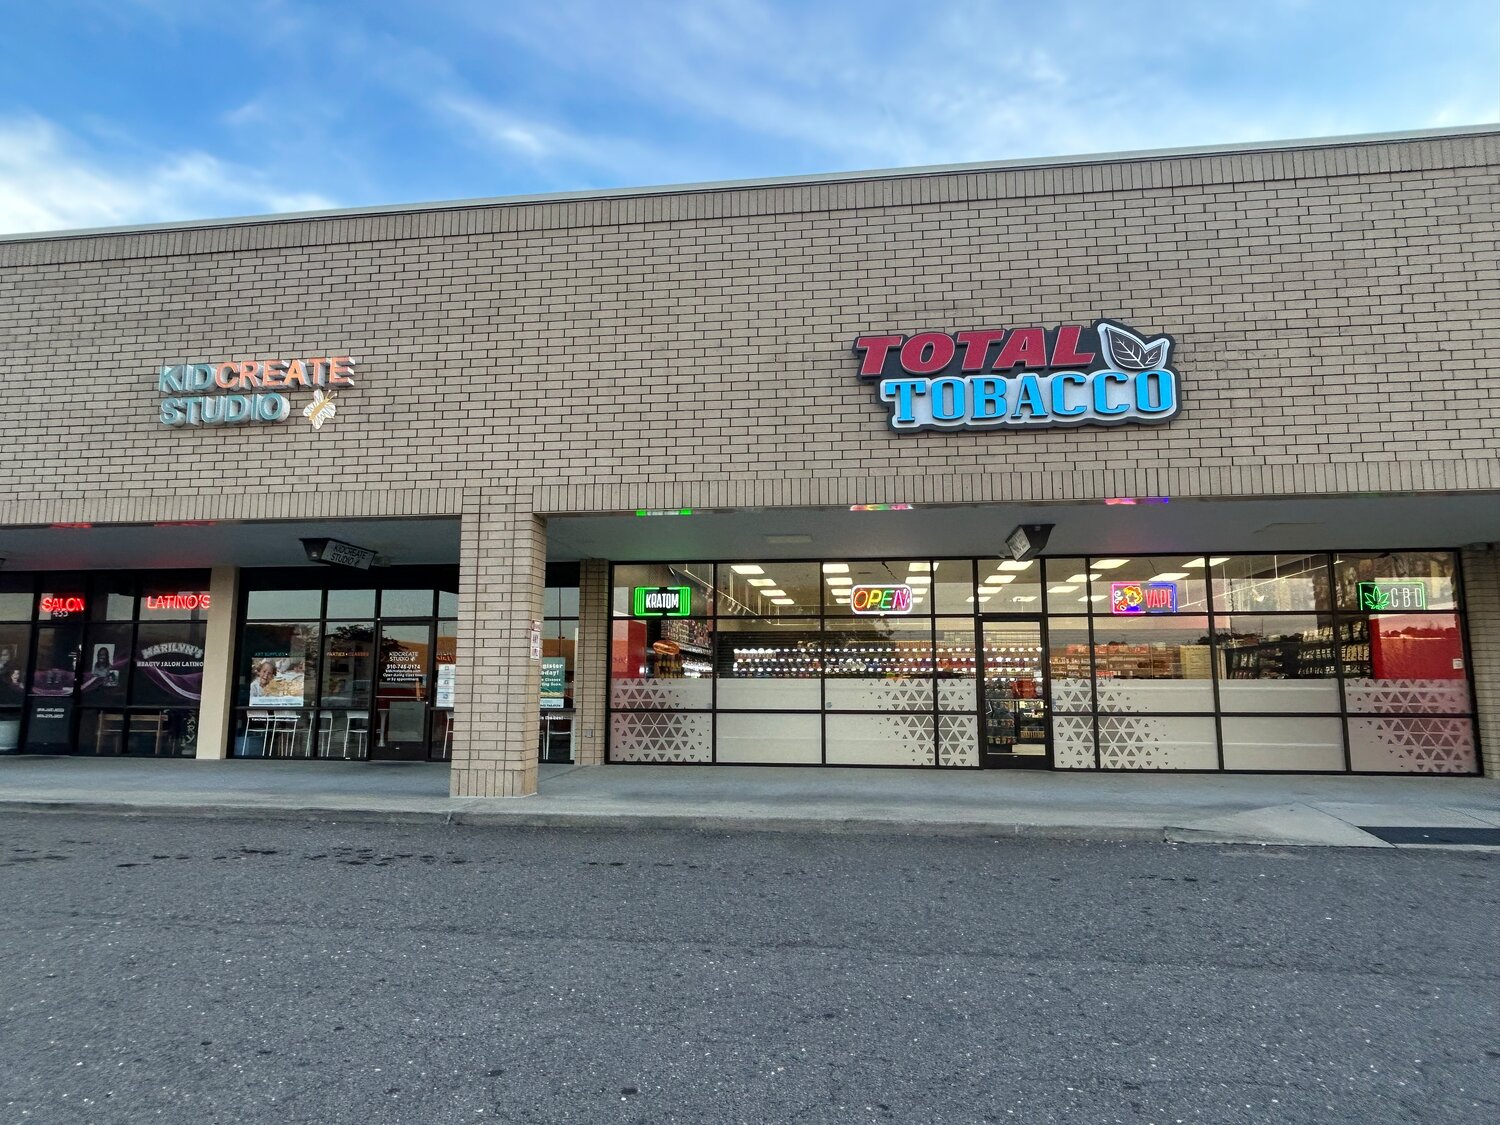 Total Tobacco, located in the Westwood Shopping Center, sits next to a kids art studio in Fayetteville. Cumberland County Commissioners are in the process of creating a zoning ordinance that would restrict the locations of shops that mainly sell hemp or tobacco products.